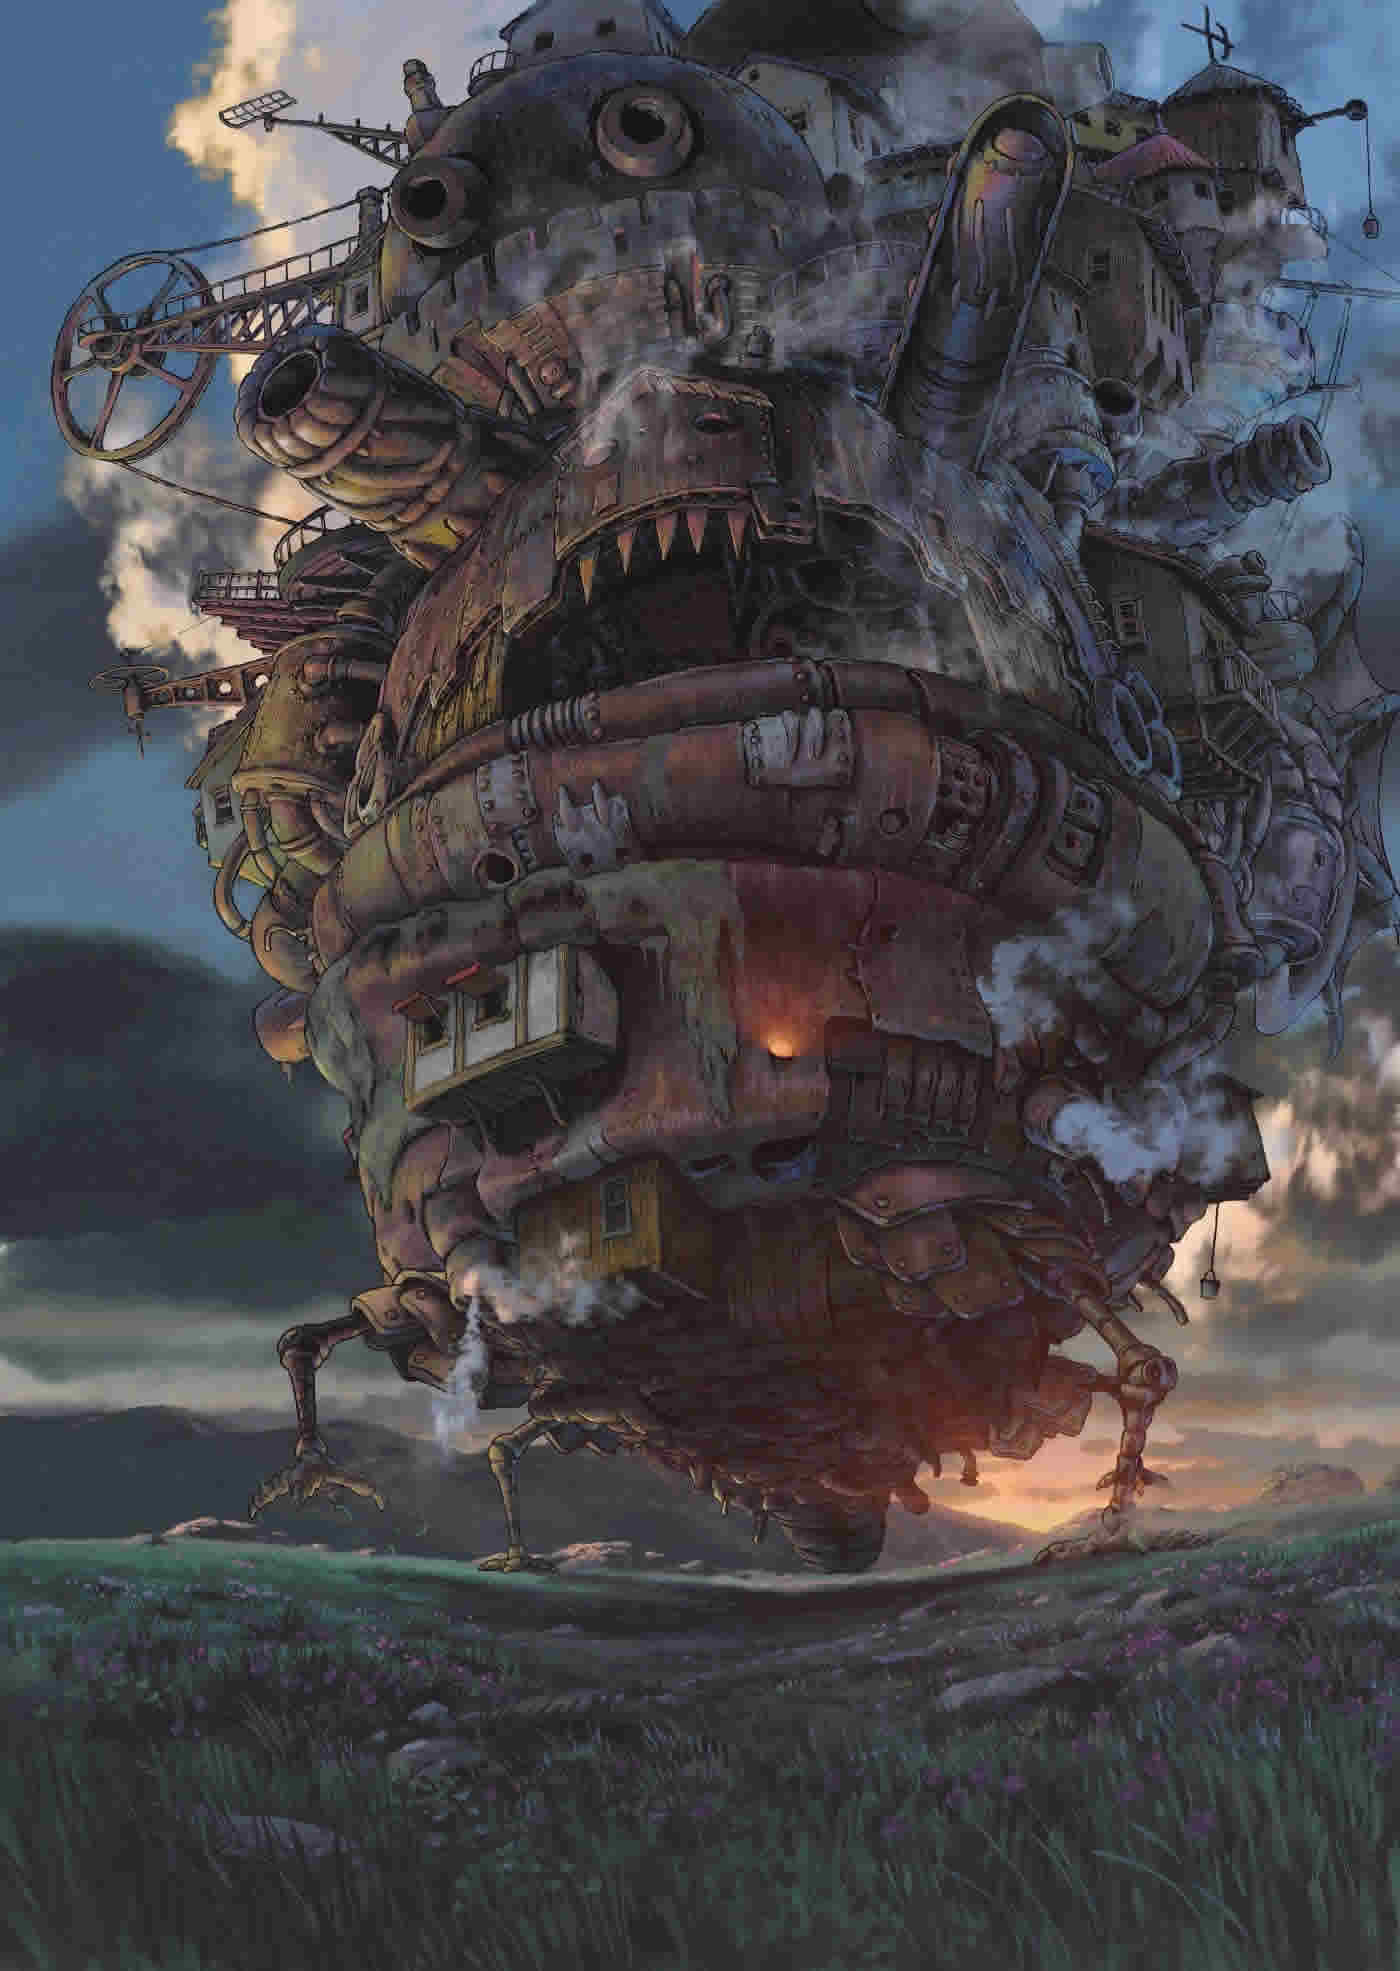 Howls Moving Castle Wallpaper HD Image Crazy Gallery